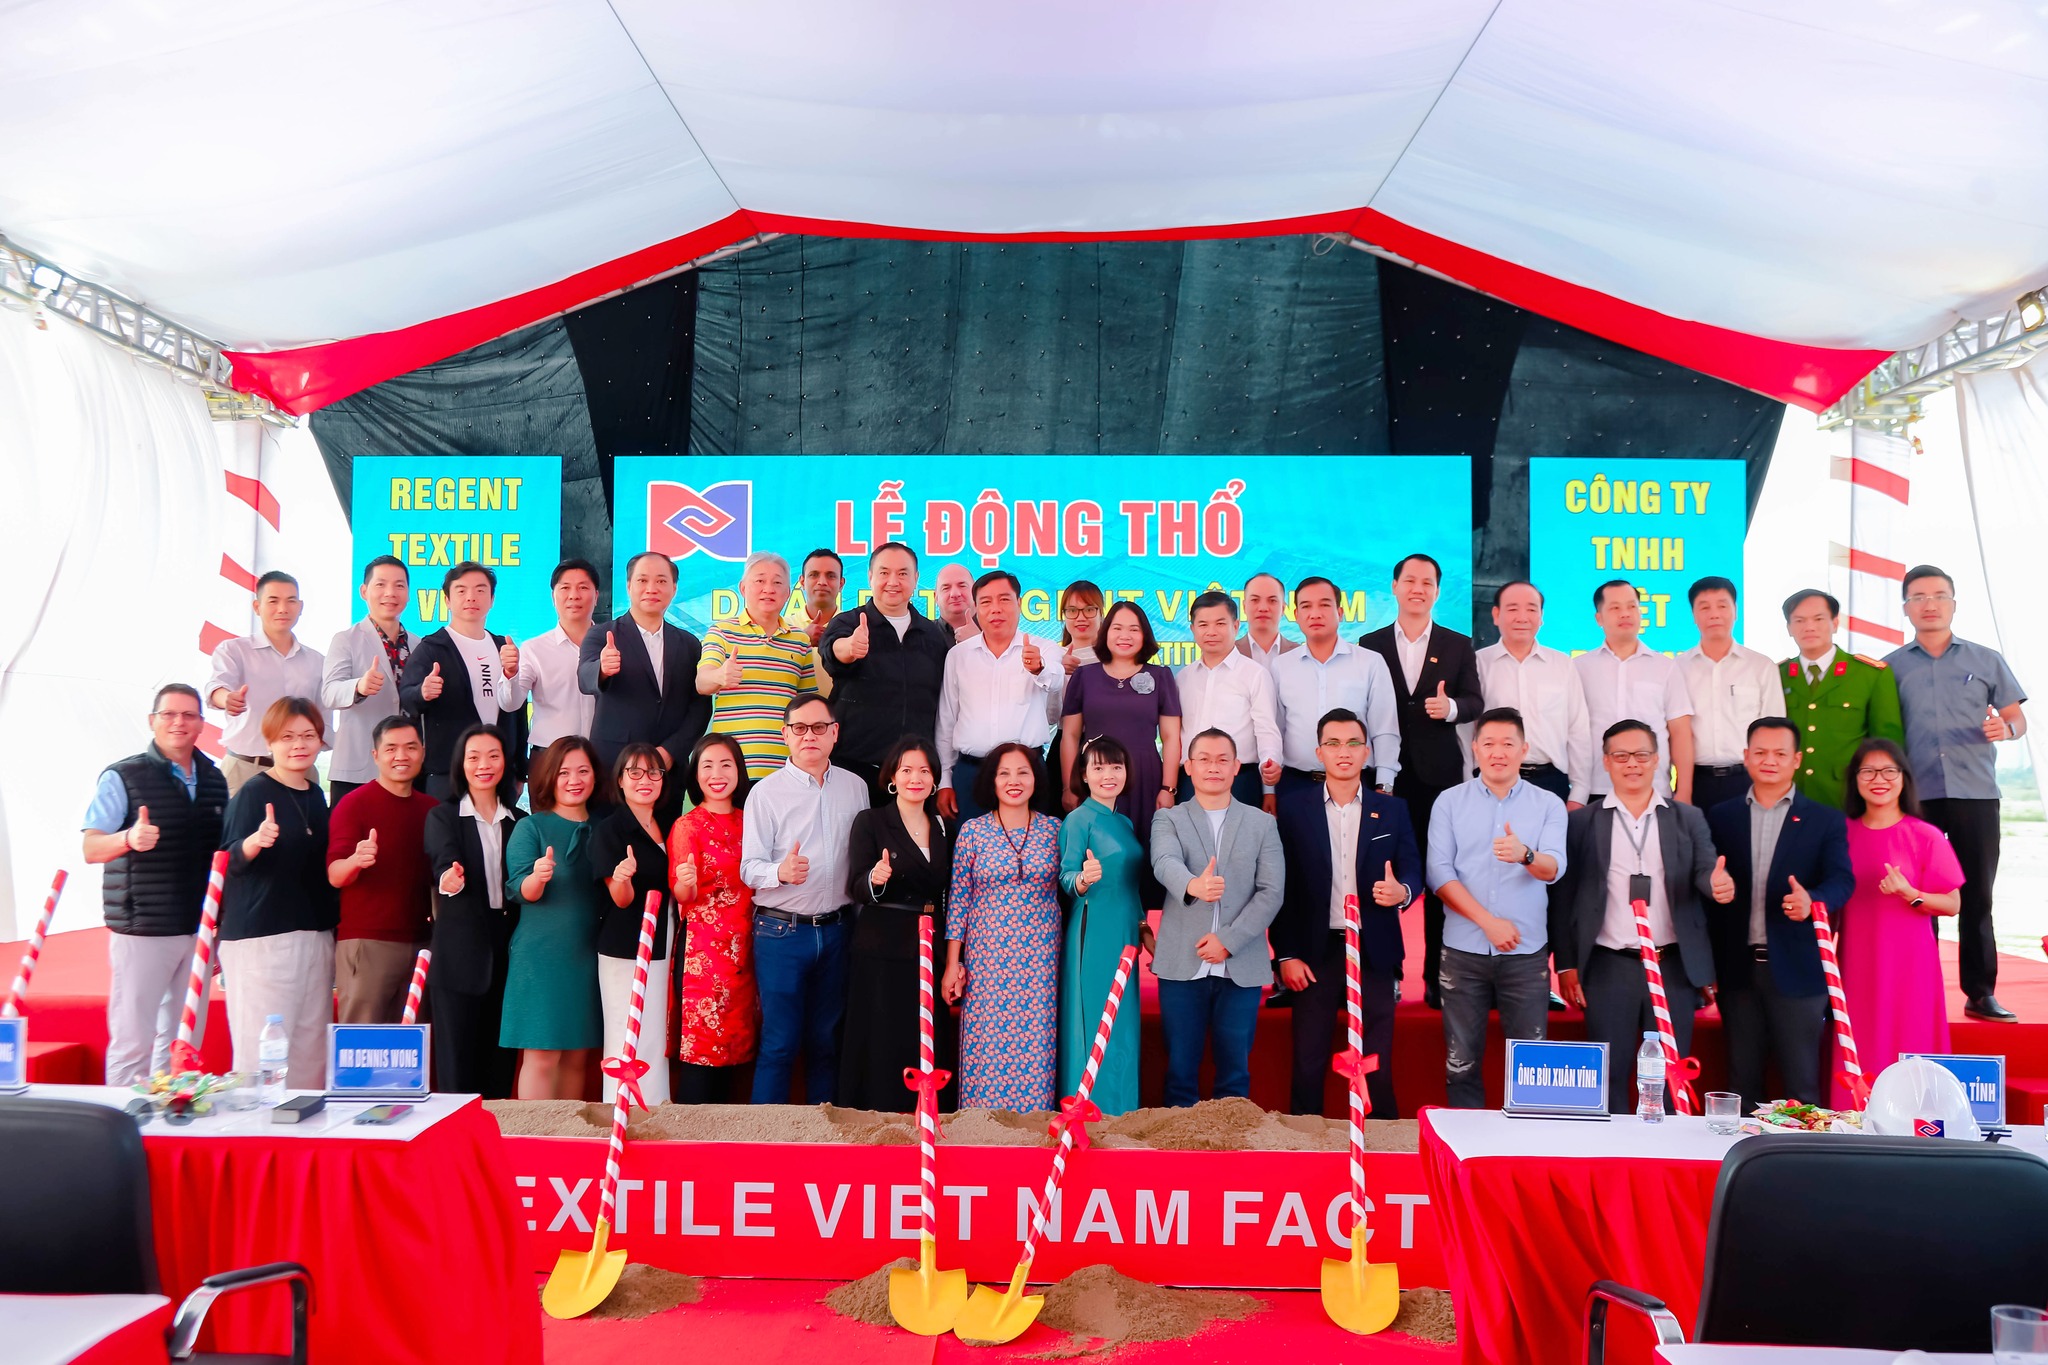 AN PHU GIA CONSTRUCTION JOINT STOCK COMPANY HONORS TO BECOME THE WINNING CONTRACTOR OF CONSTRUCTION FOR THE STARTING ITEM OF REGENT VIETNAM TEXTILE FACTORY PROJECT